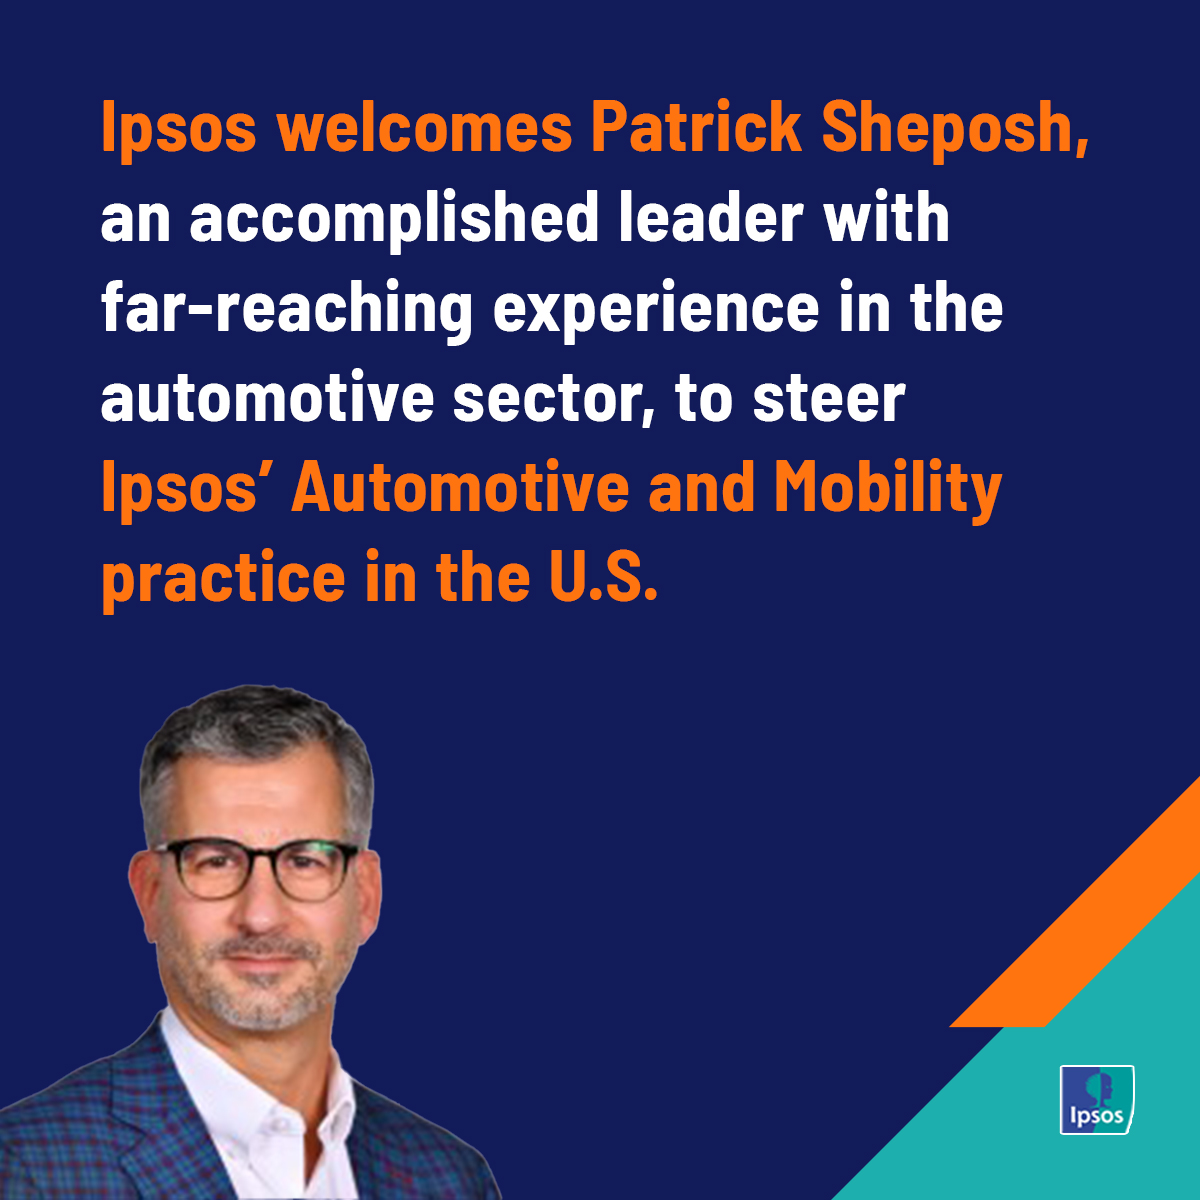 Ipsos welcomes Patrick Sheposh as head of its U.S. Automotive and Mobility service line. Sheposh will leverage Ipsos’ research, data, and benchmarking capabilities to deliver transformative insights and advisory solutions to top clients in the auto space. ipsos.com/en-us/patrick-…